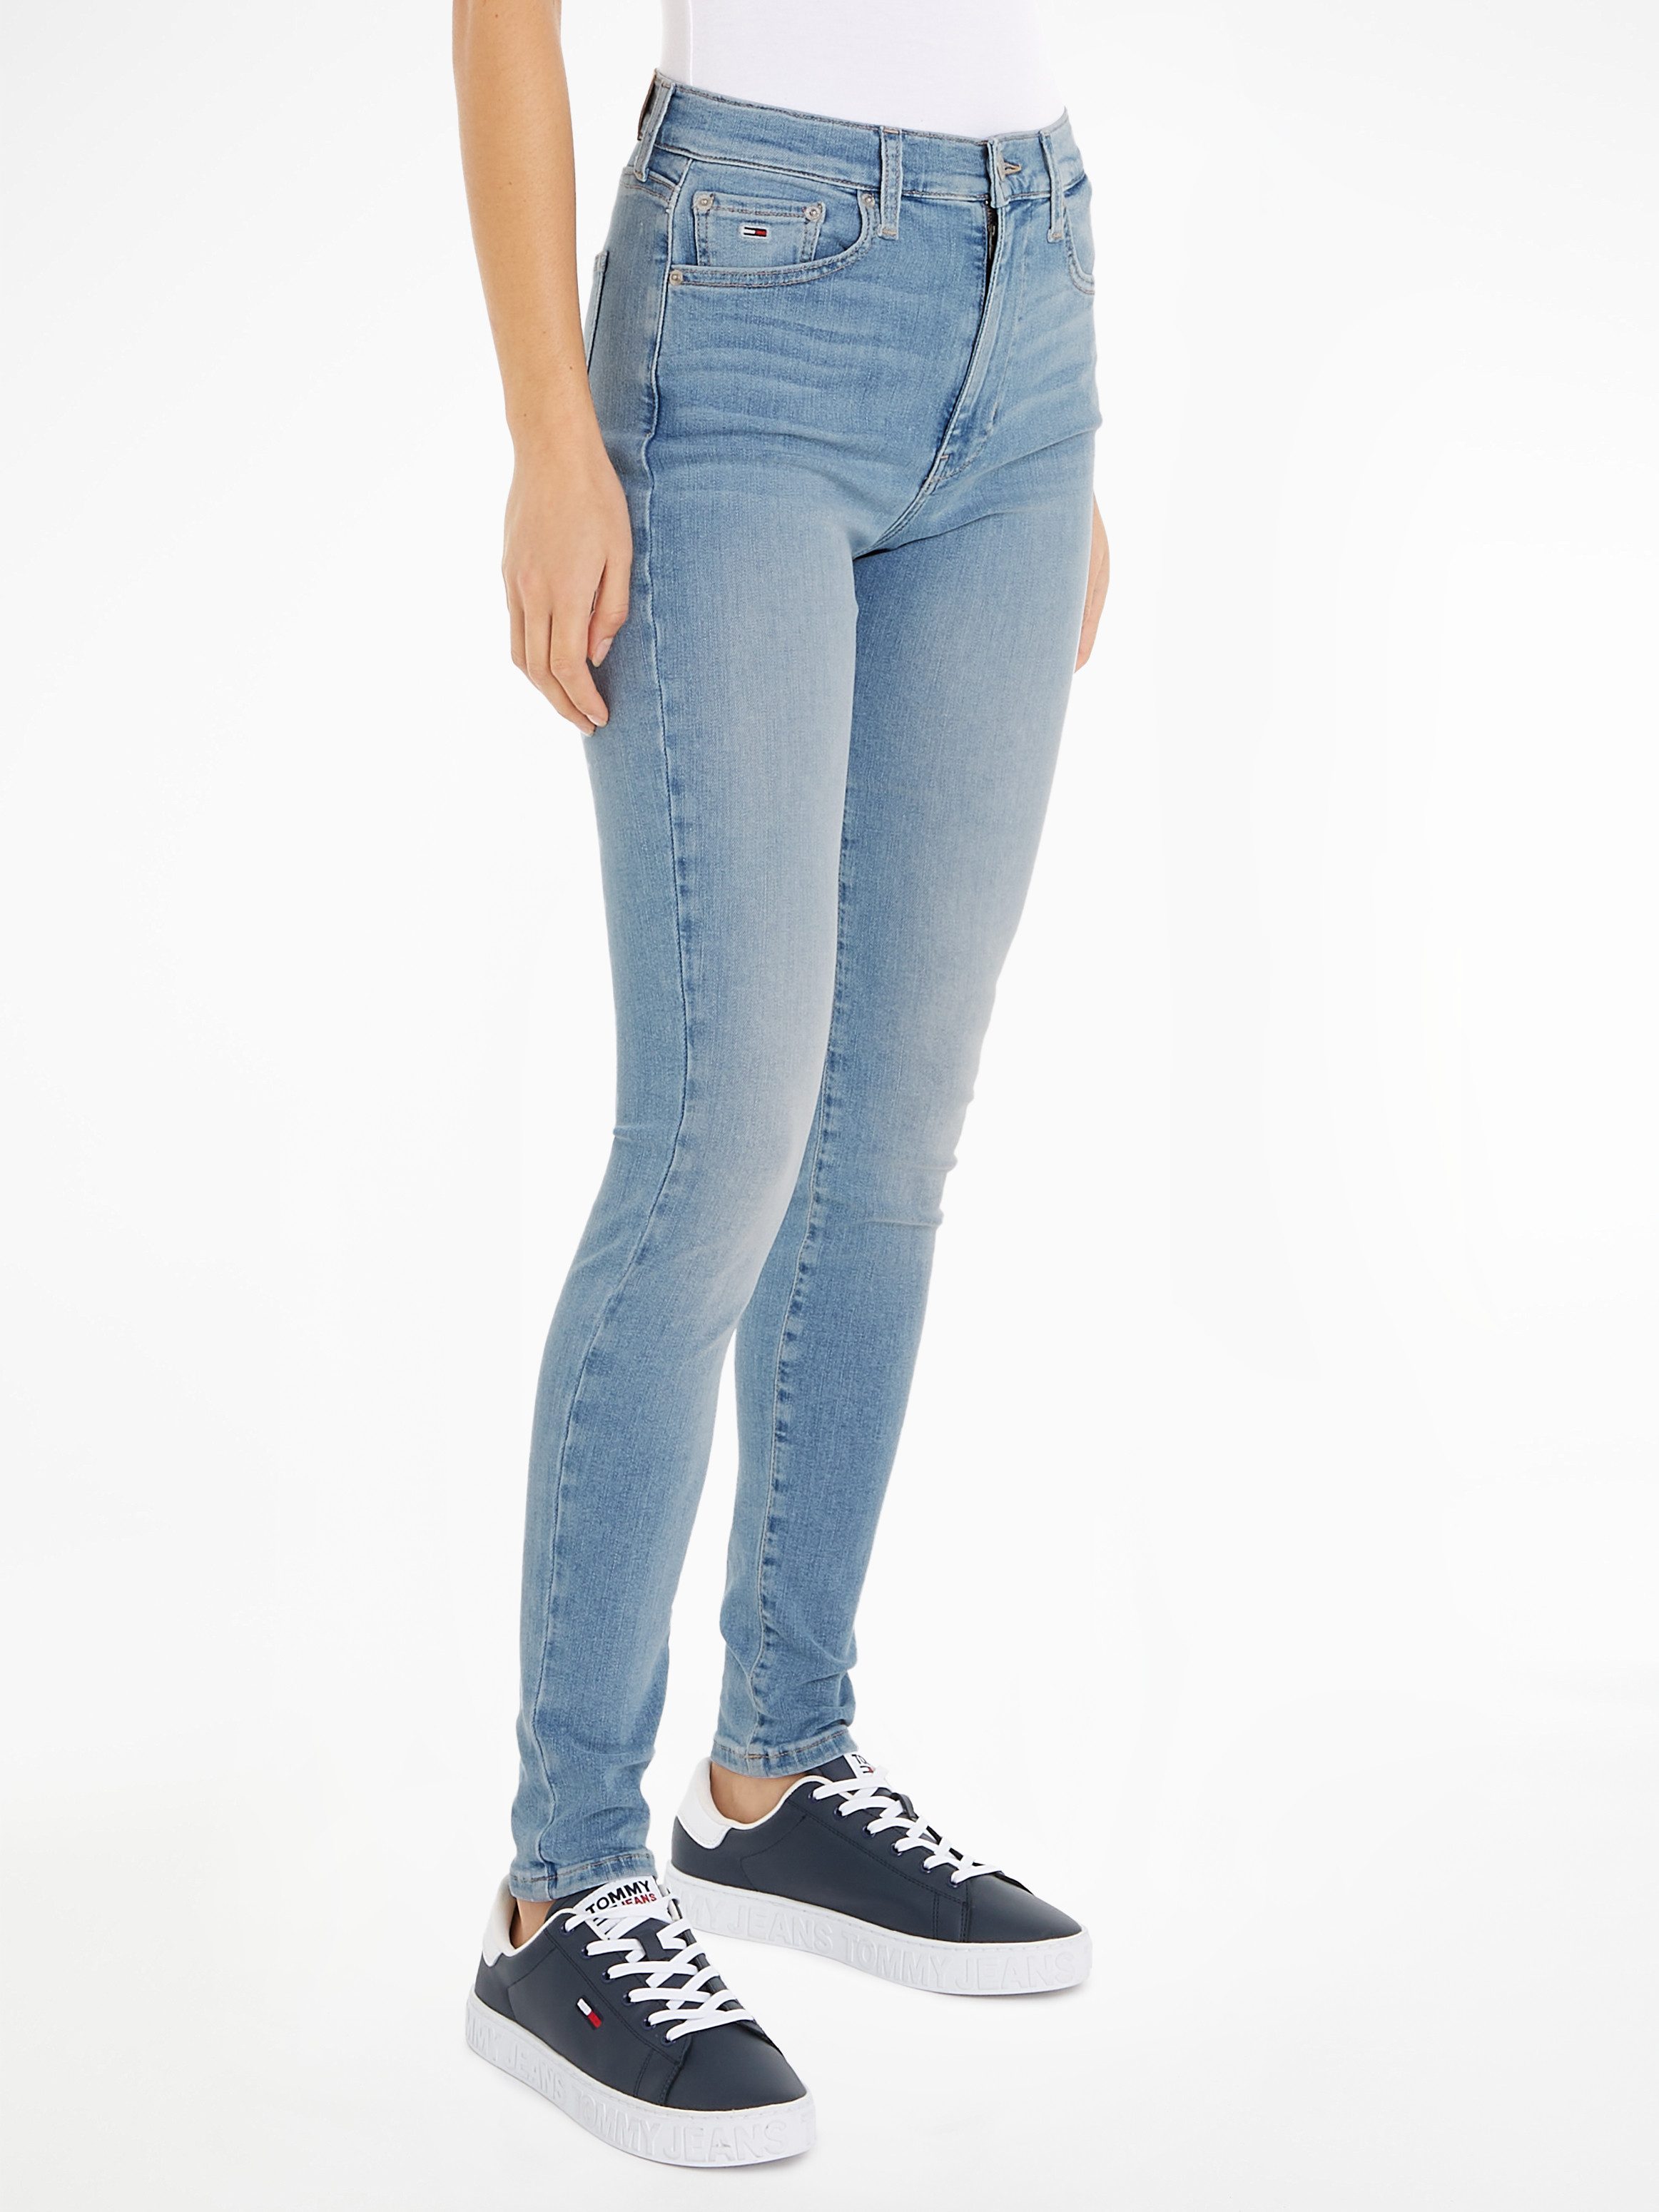 Tommy Jeans Skinny-fit-Jeans Tommy Jeans - Damenjeans SYLVIA - High Waist - Skinny-Fit Röhrenjeans mit hoher Taille und Tommy Jeans Logo-Badge